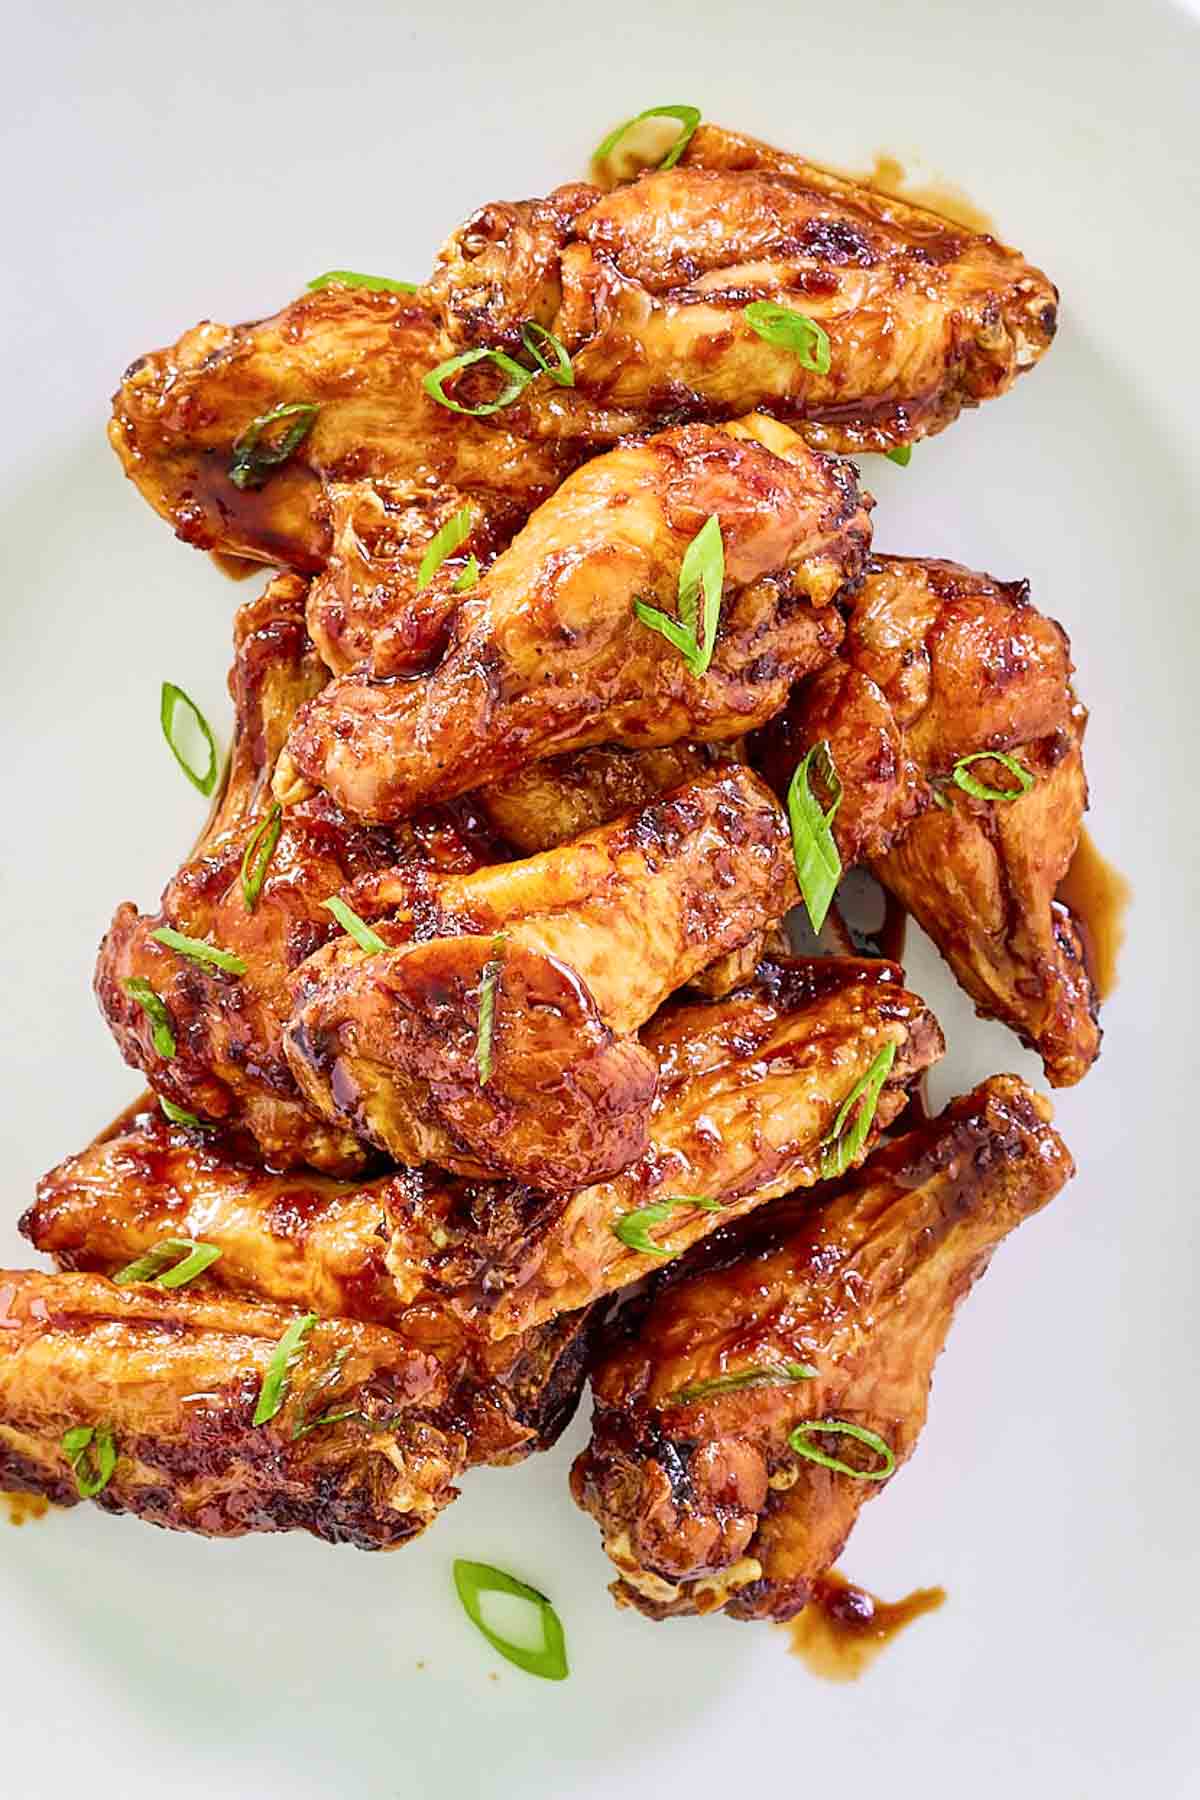 Overhead view of honey garlic chicken wings on a plate.